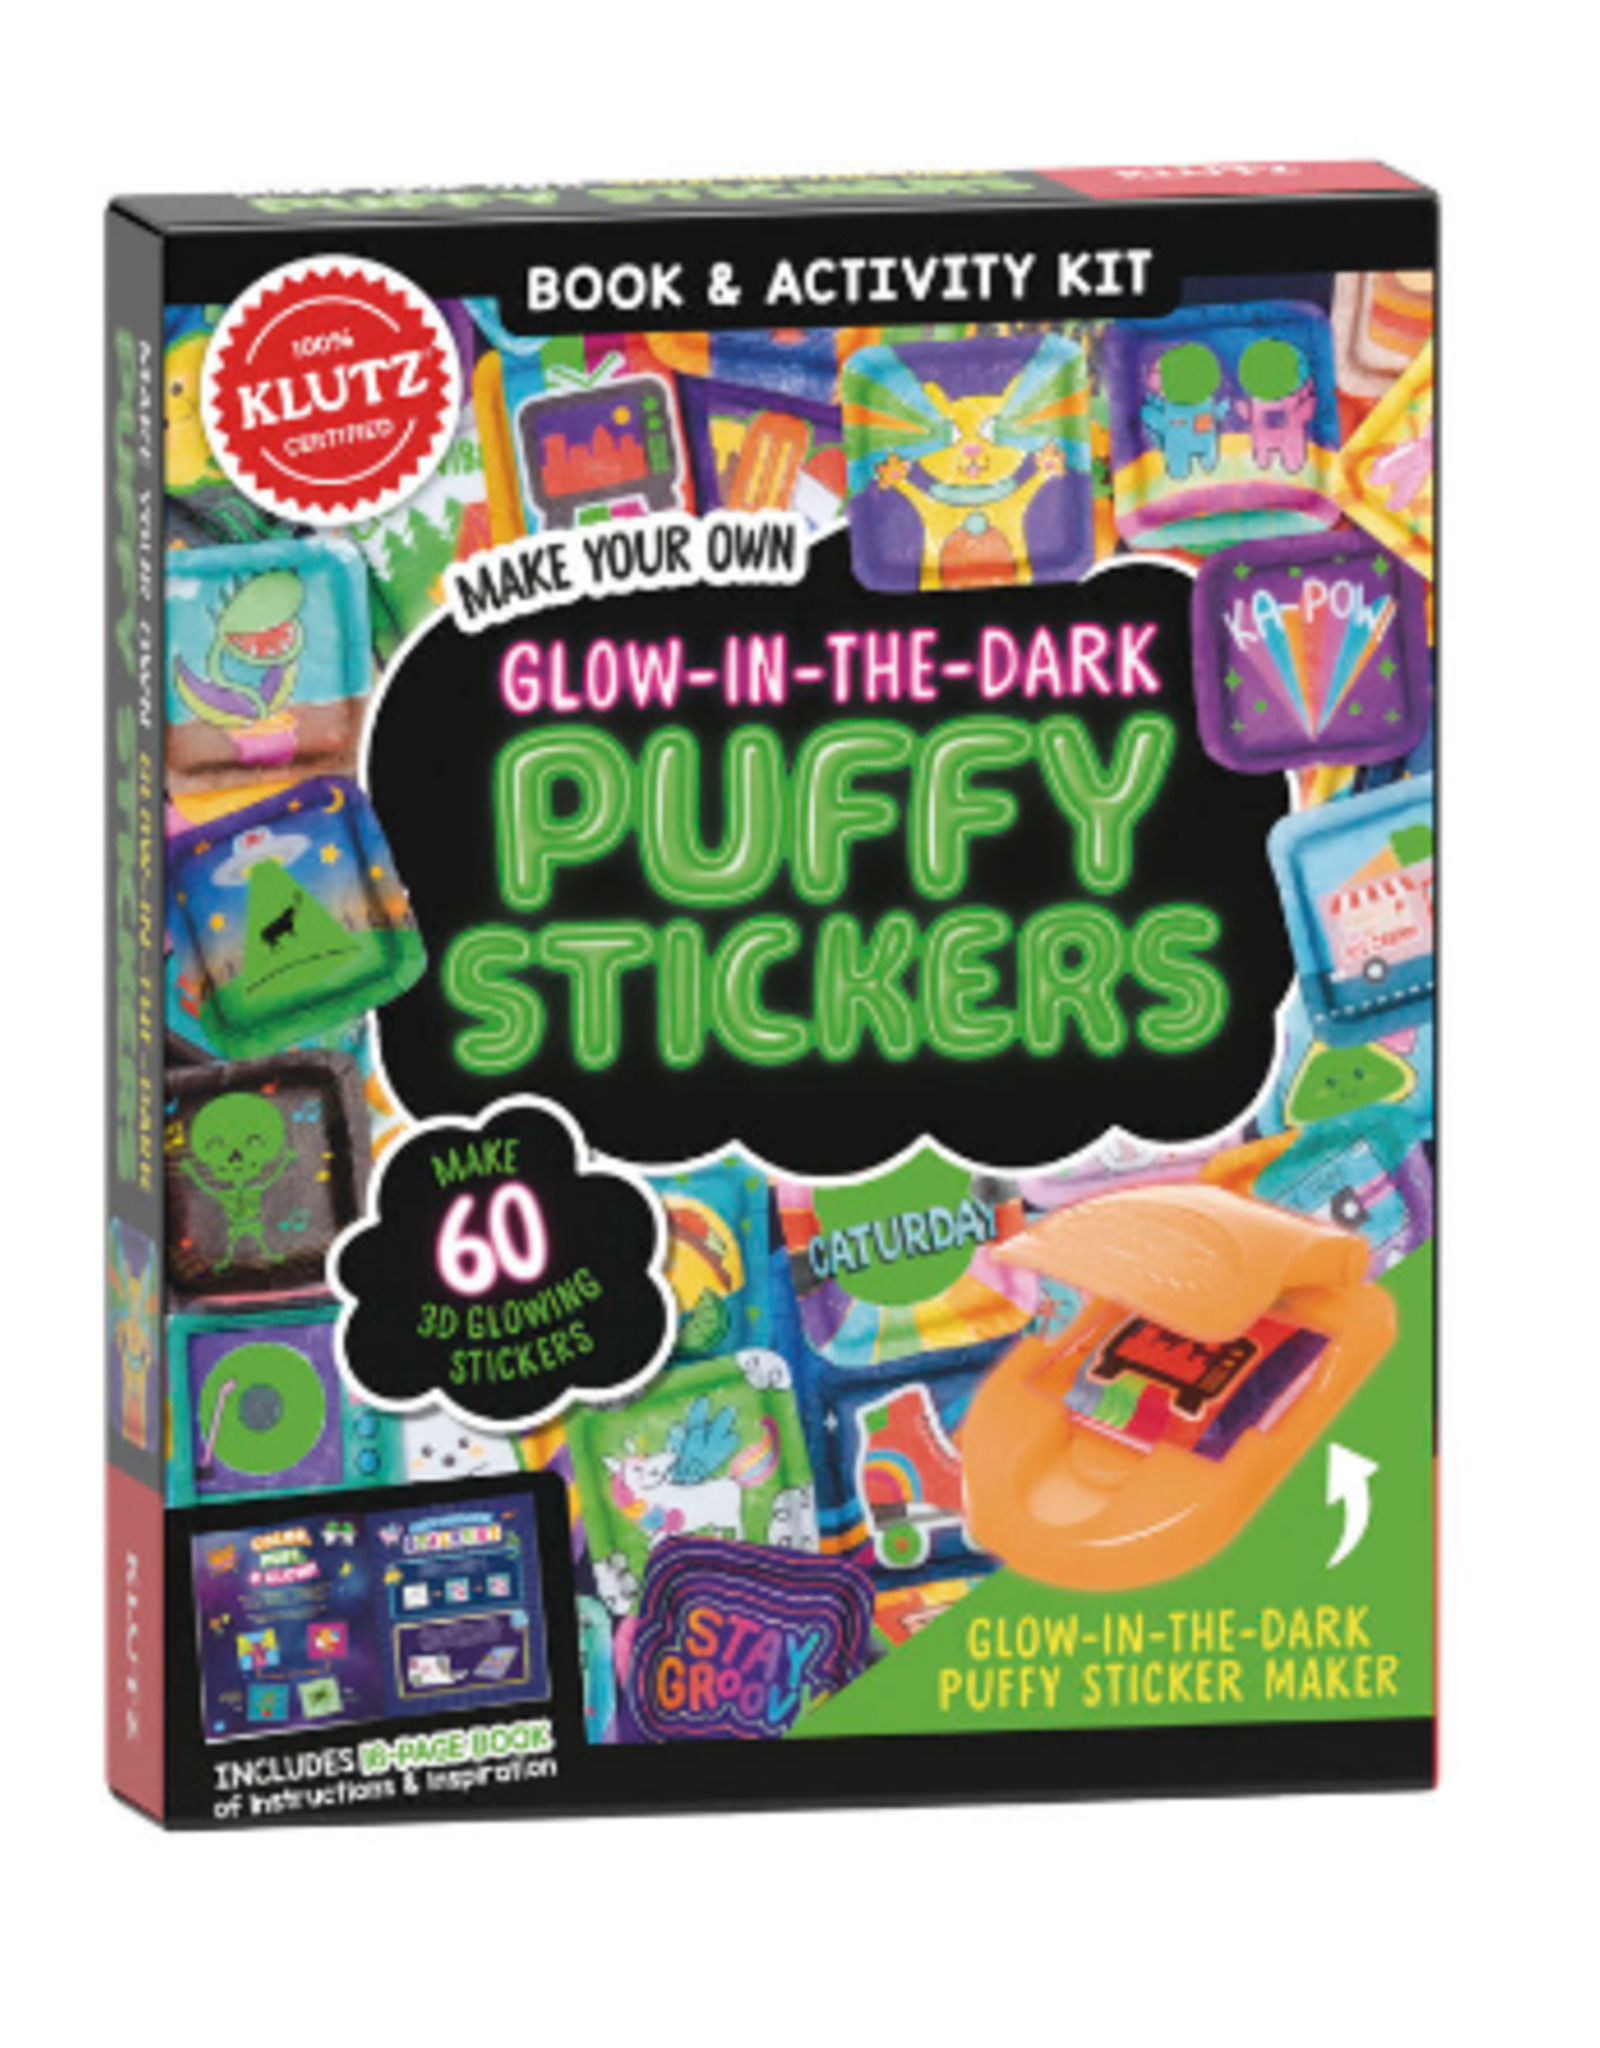 Klutz Make Your Own Glow-in-the-dark Puffy Stickers